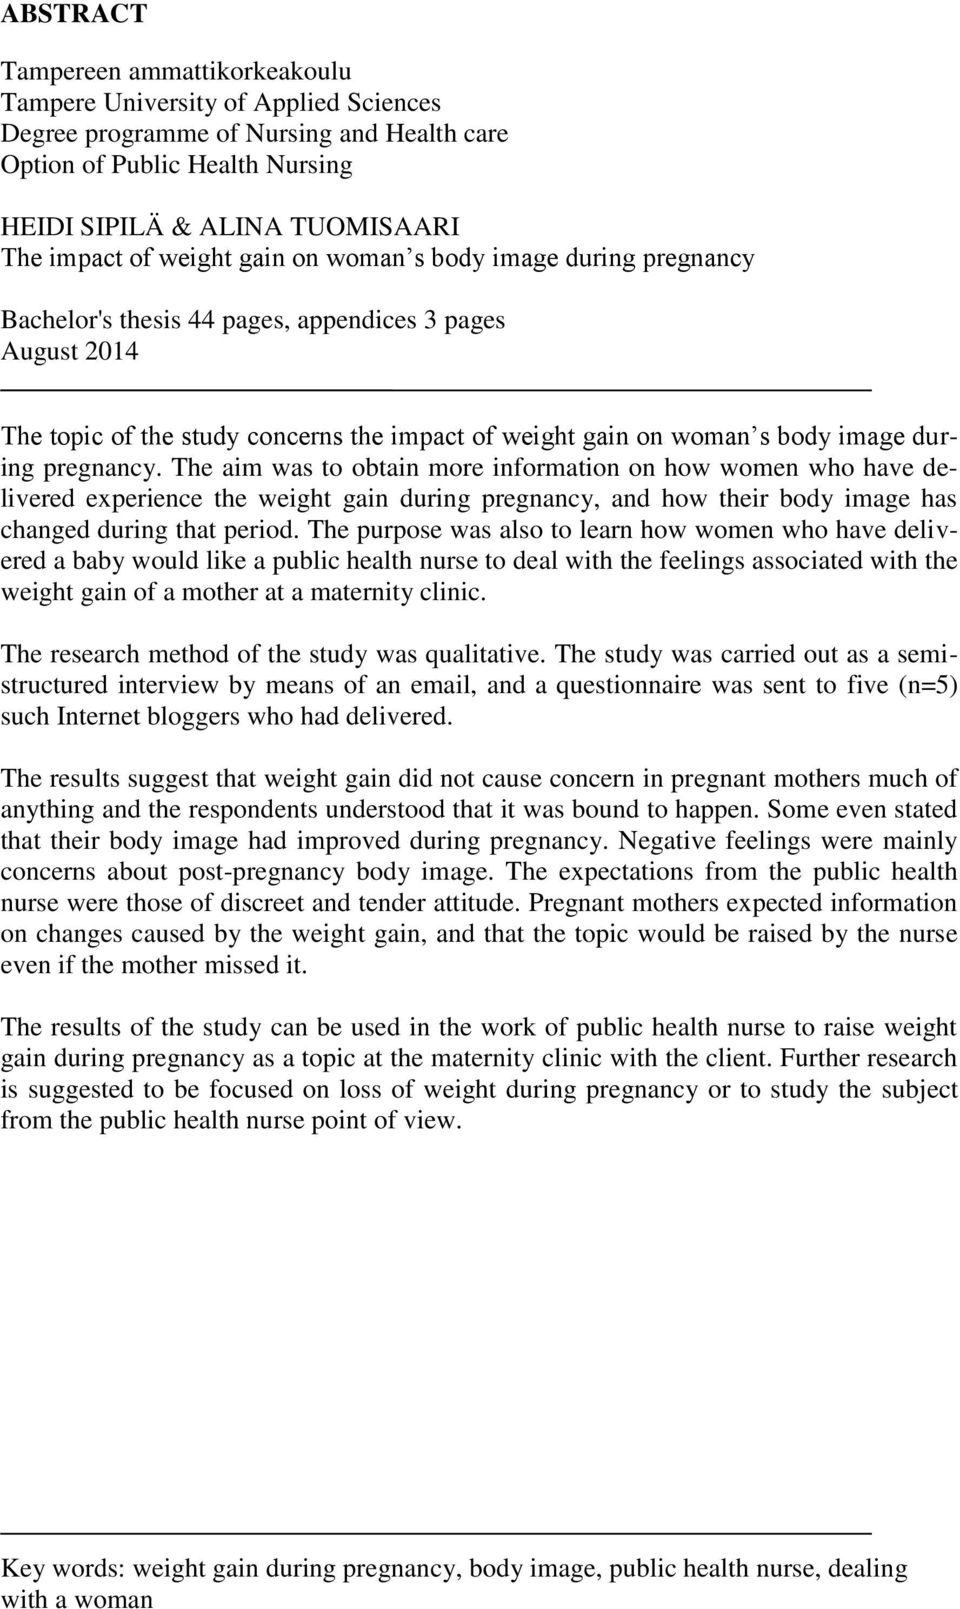 pregnancy. The aim was to obtain more information on how women who have delivered experience the weight gain during pregnancy, and how their body image has changed during that period.